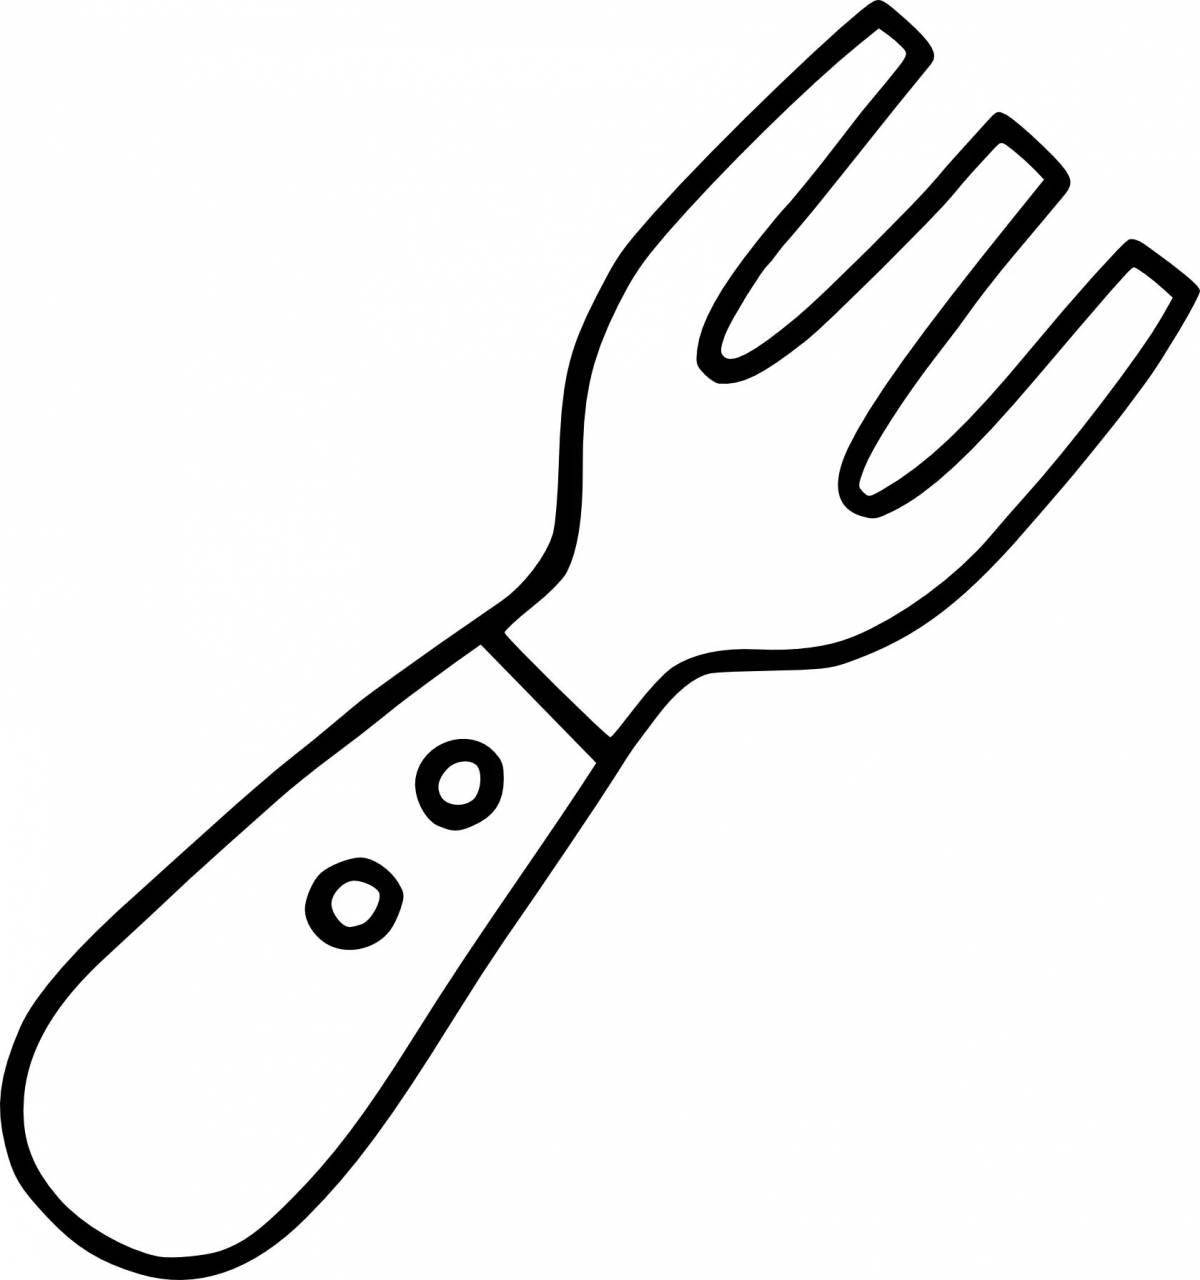 Fun fork coloring for kids